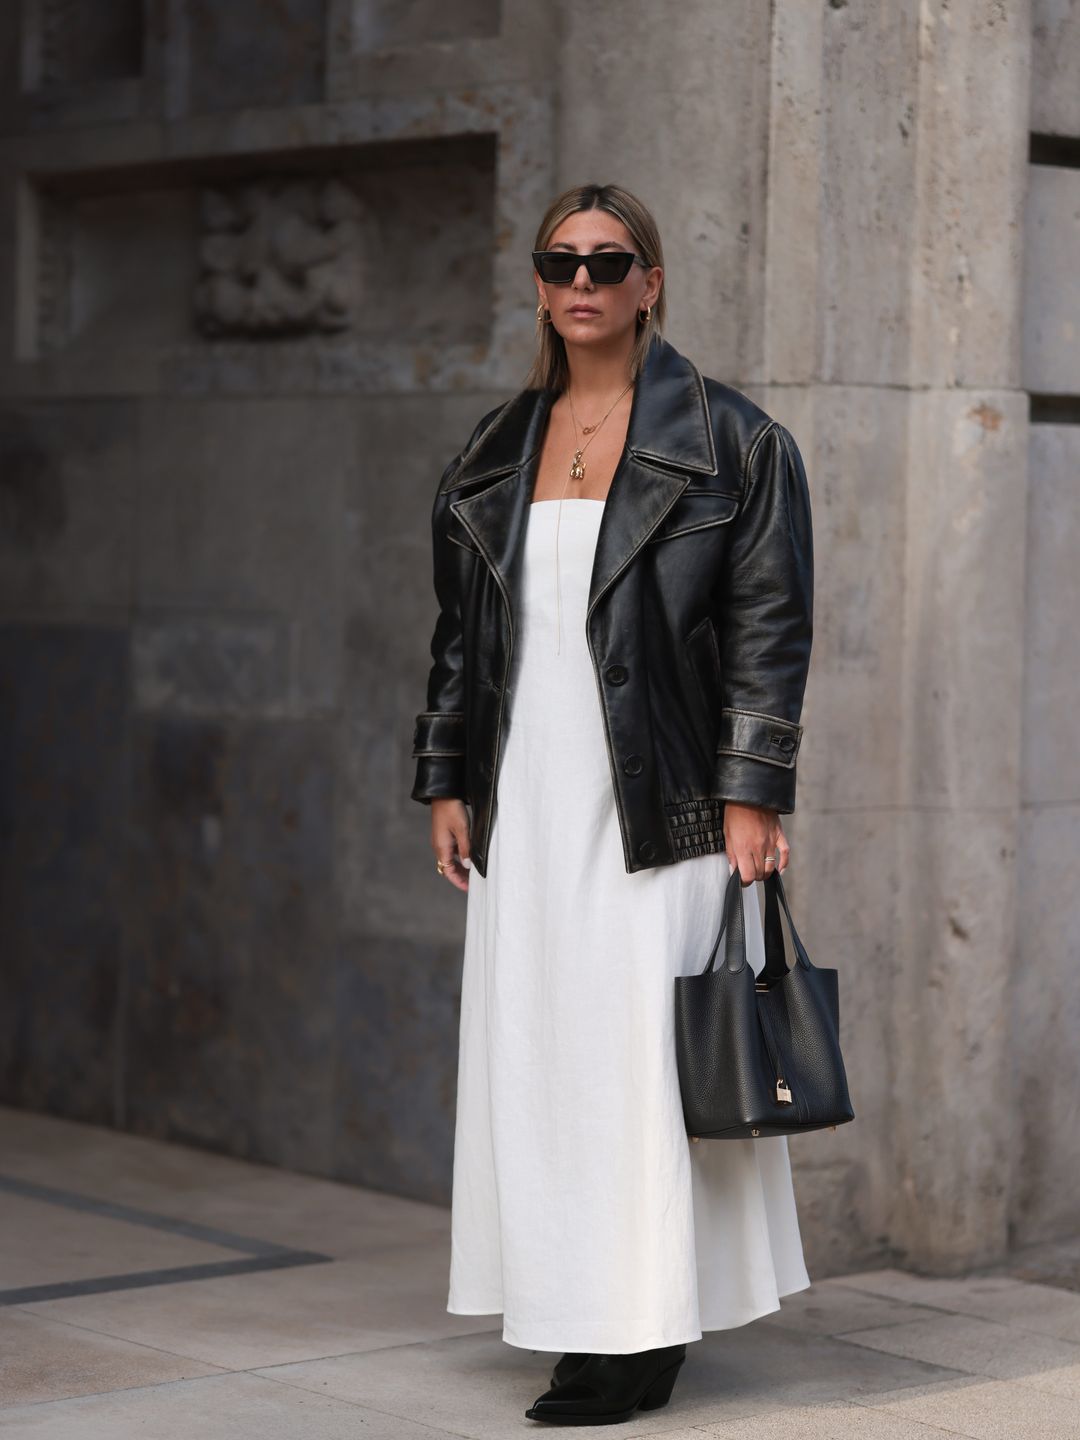 Woman is wearing a white dress with an oversized black leather jacket